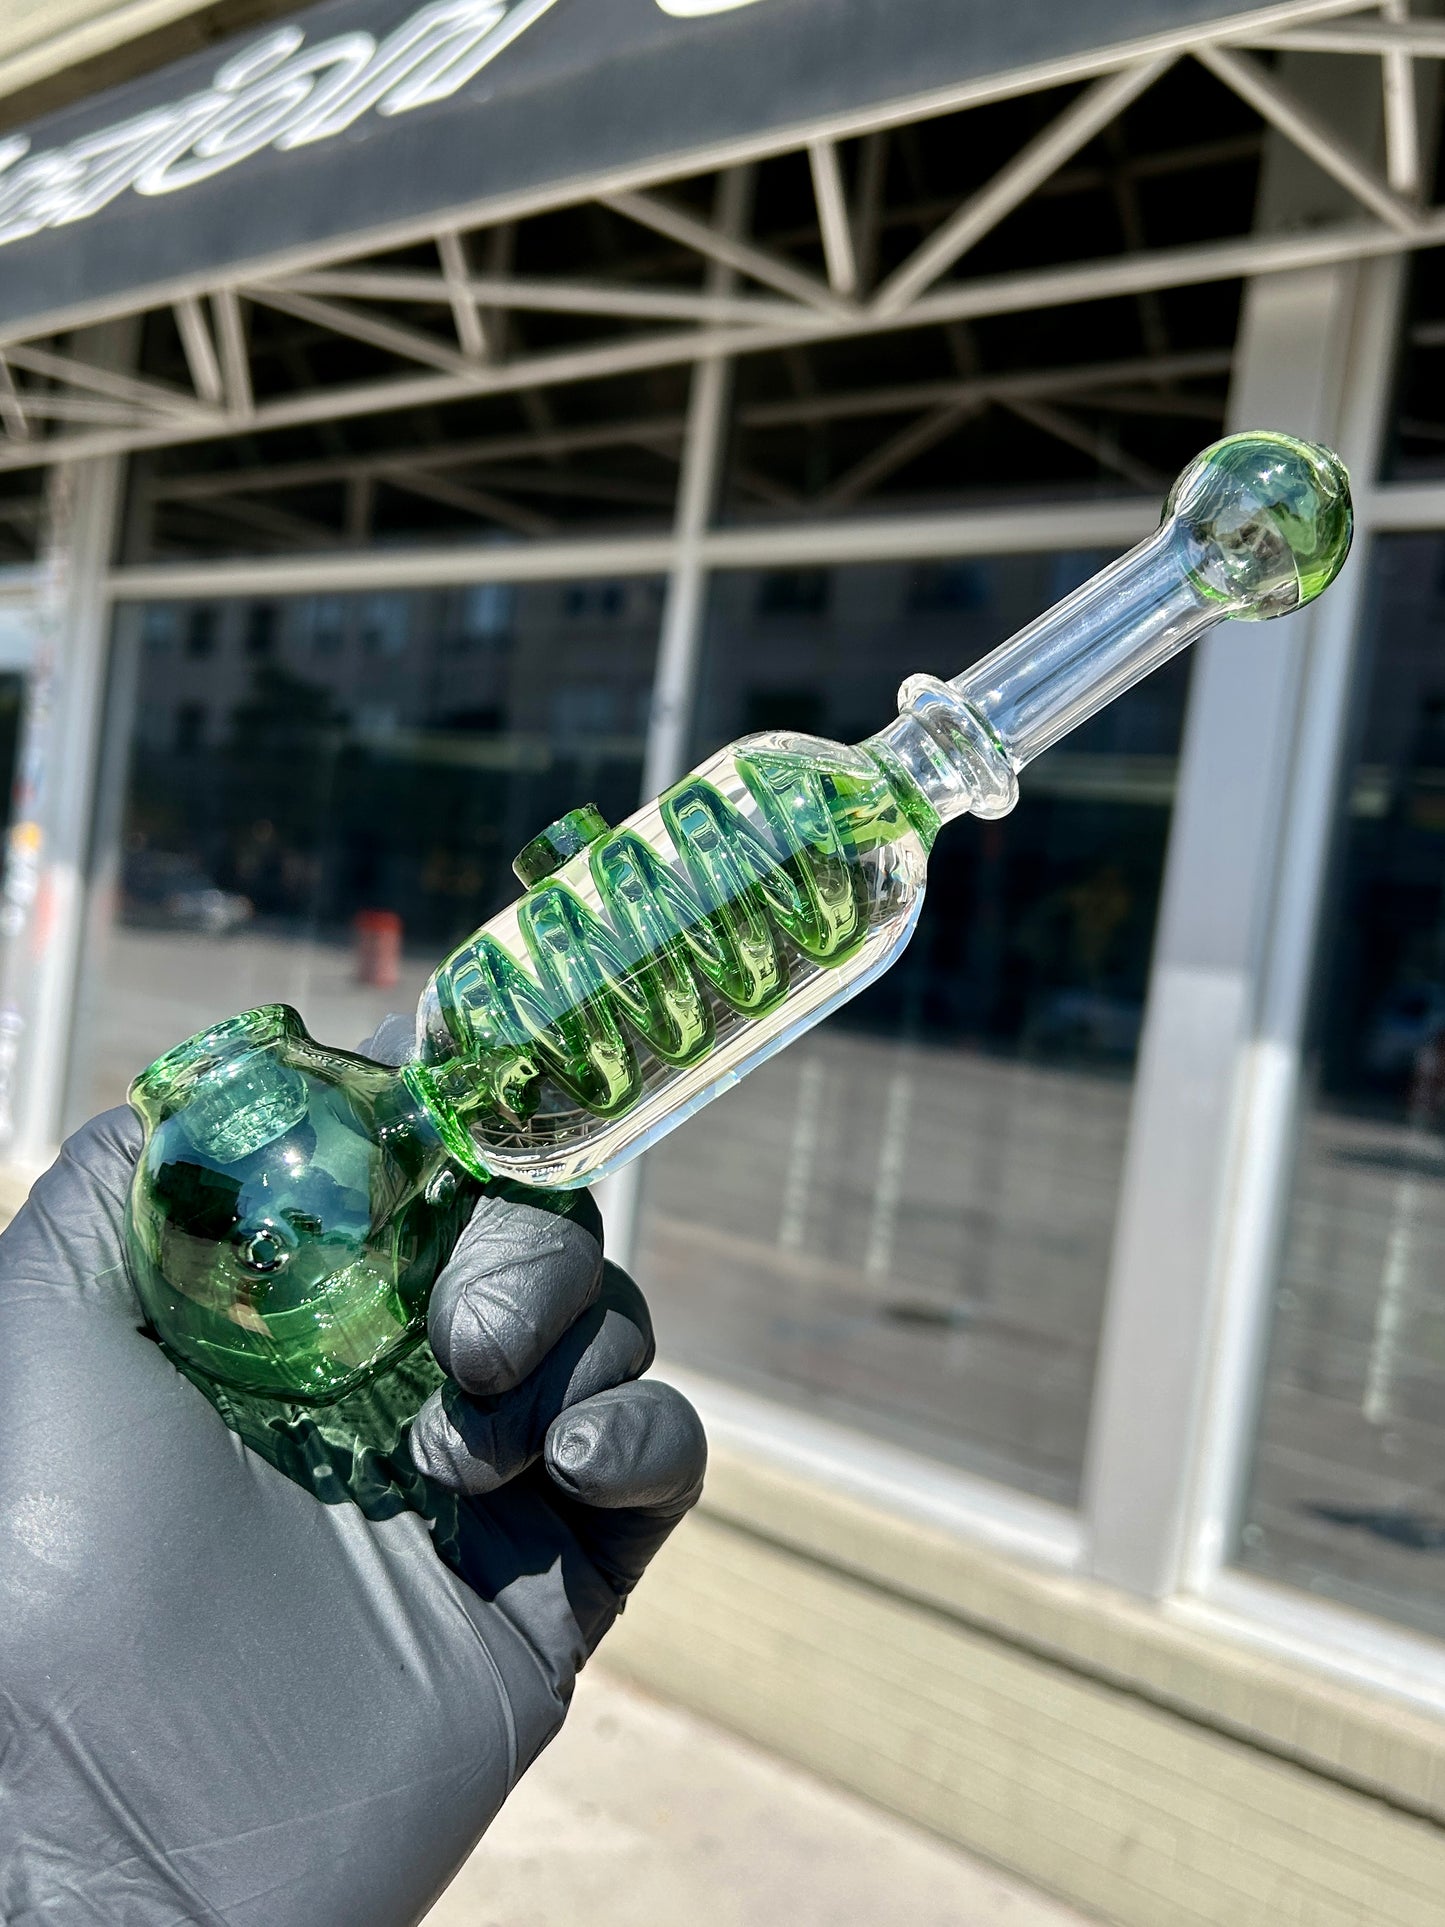 Large Glycerine Filled, Freezable Pipe With Built in Glass Screen